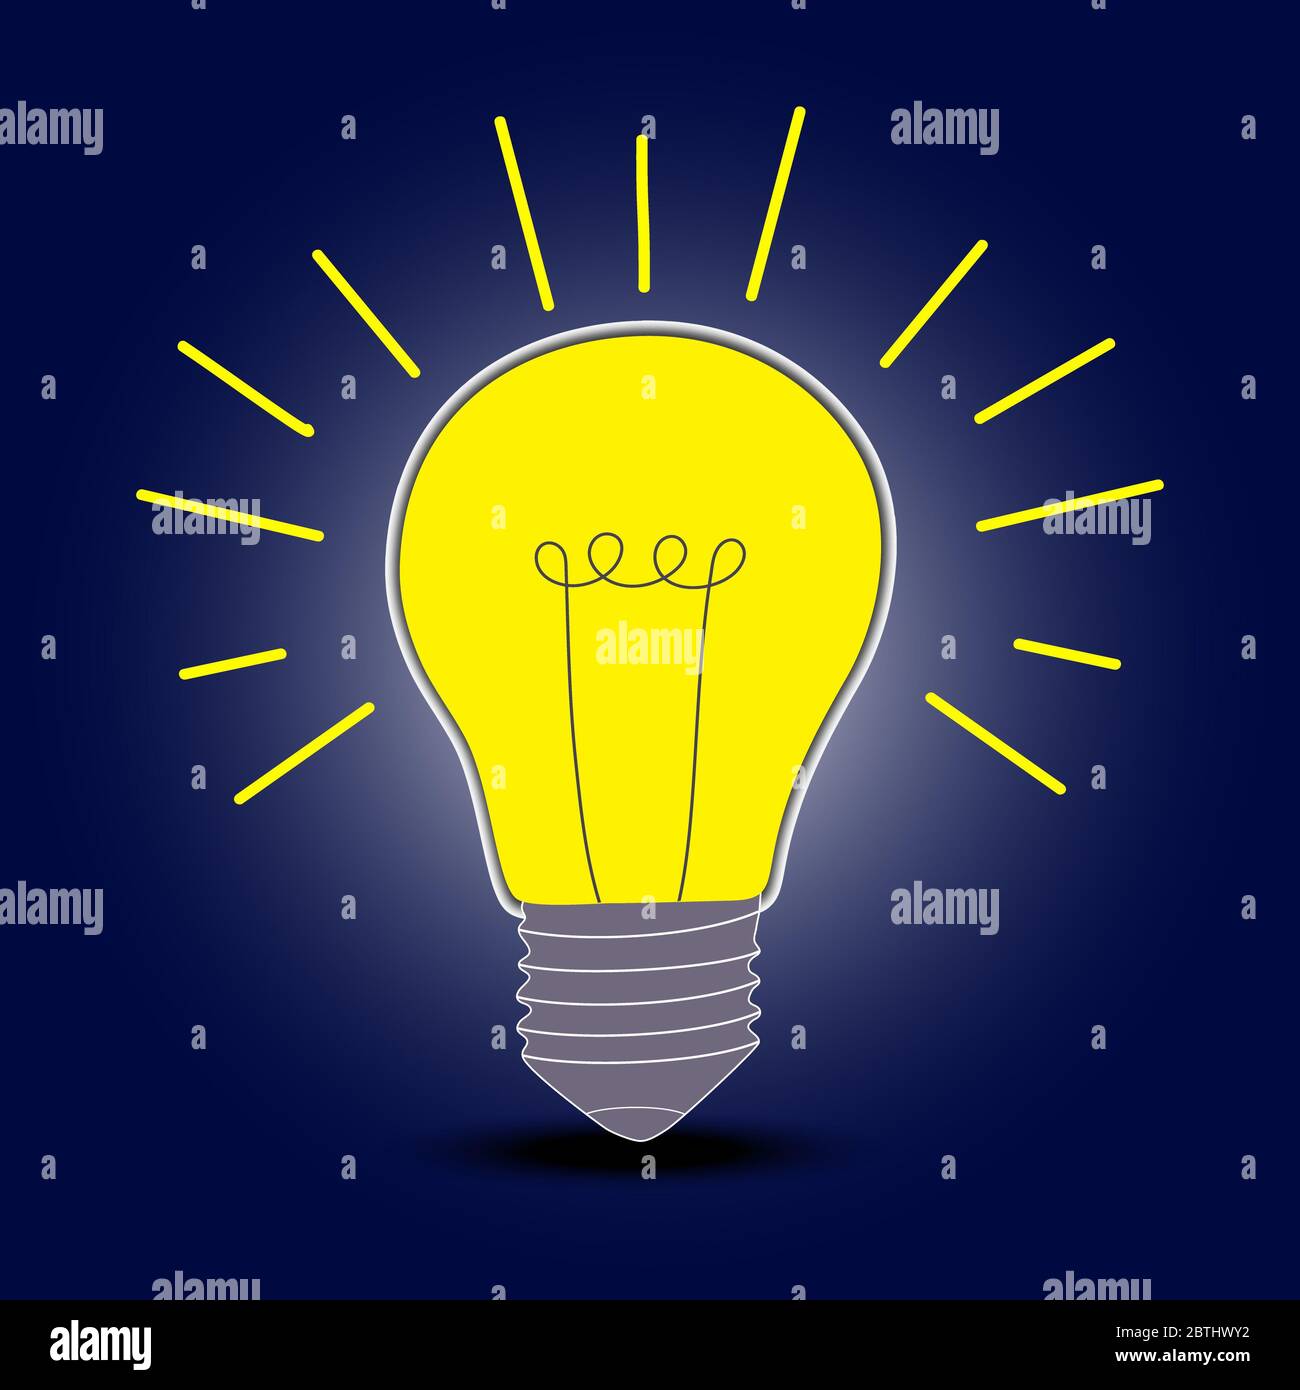 the light bulb. Concept of startup ideas on a blue background . Startup banner, business presentations. The idea , the thought.Illustration Stock Photo